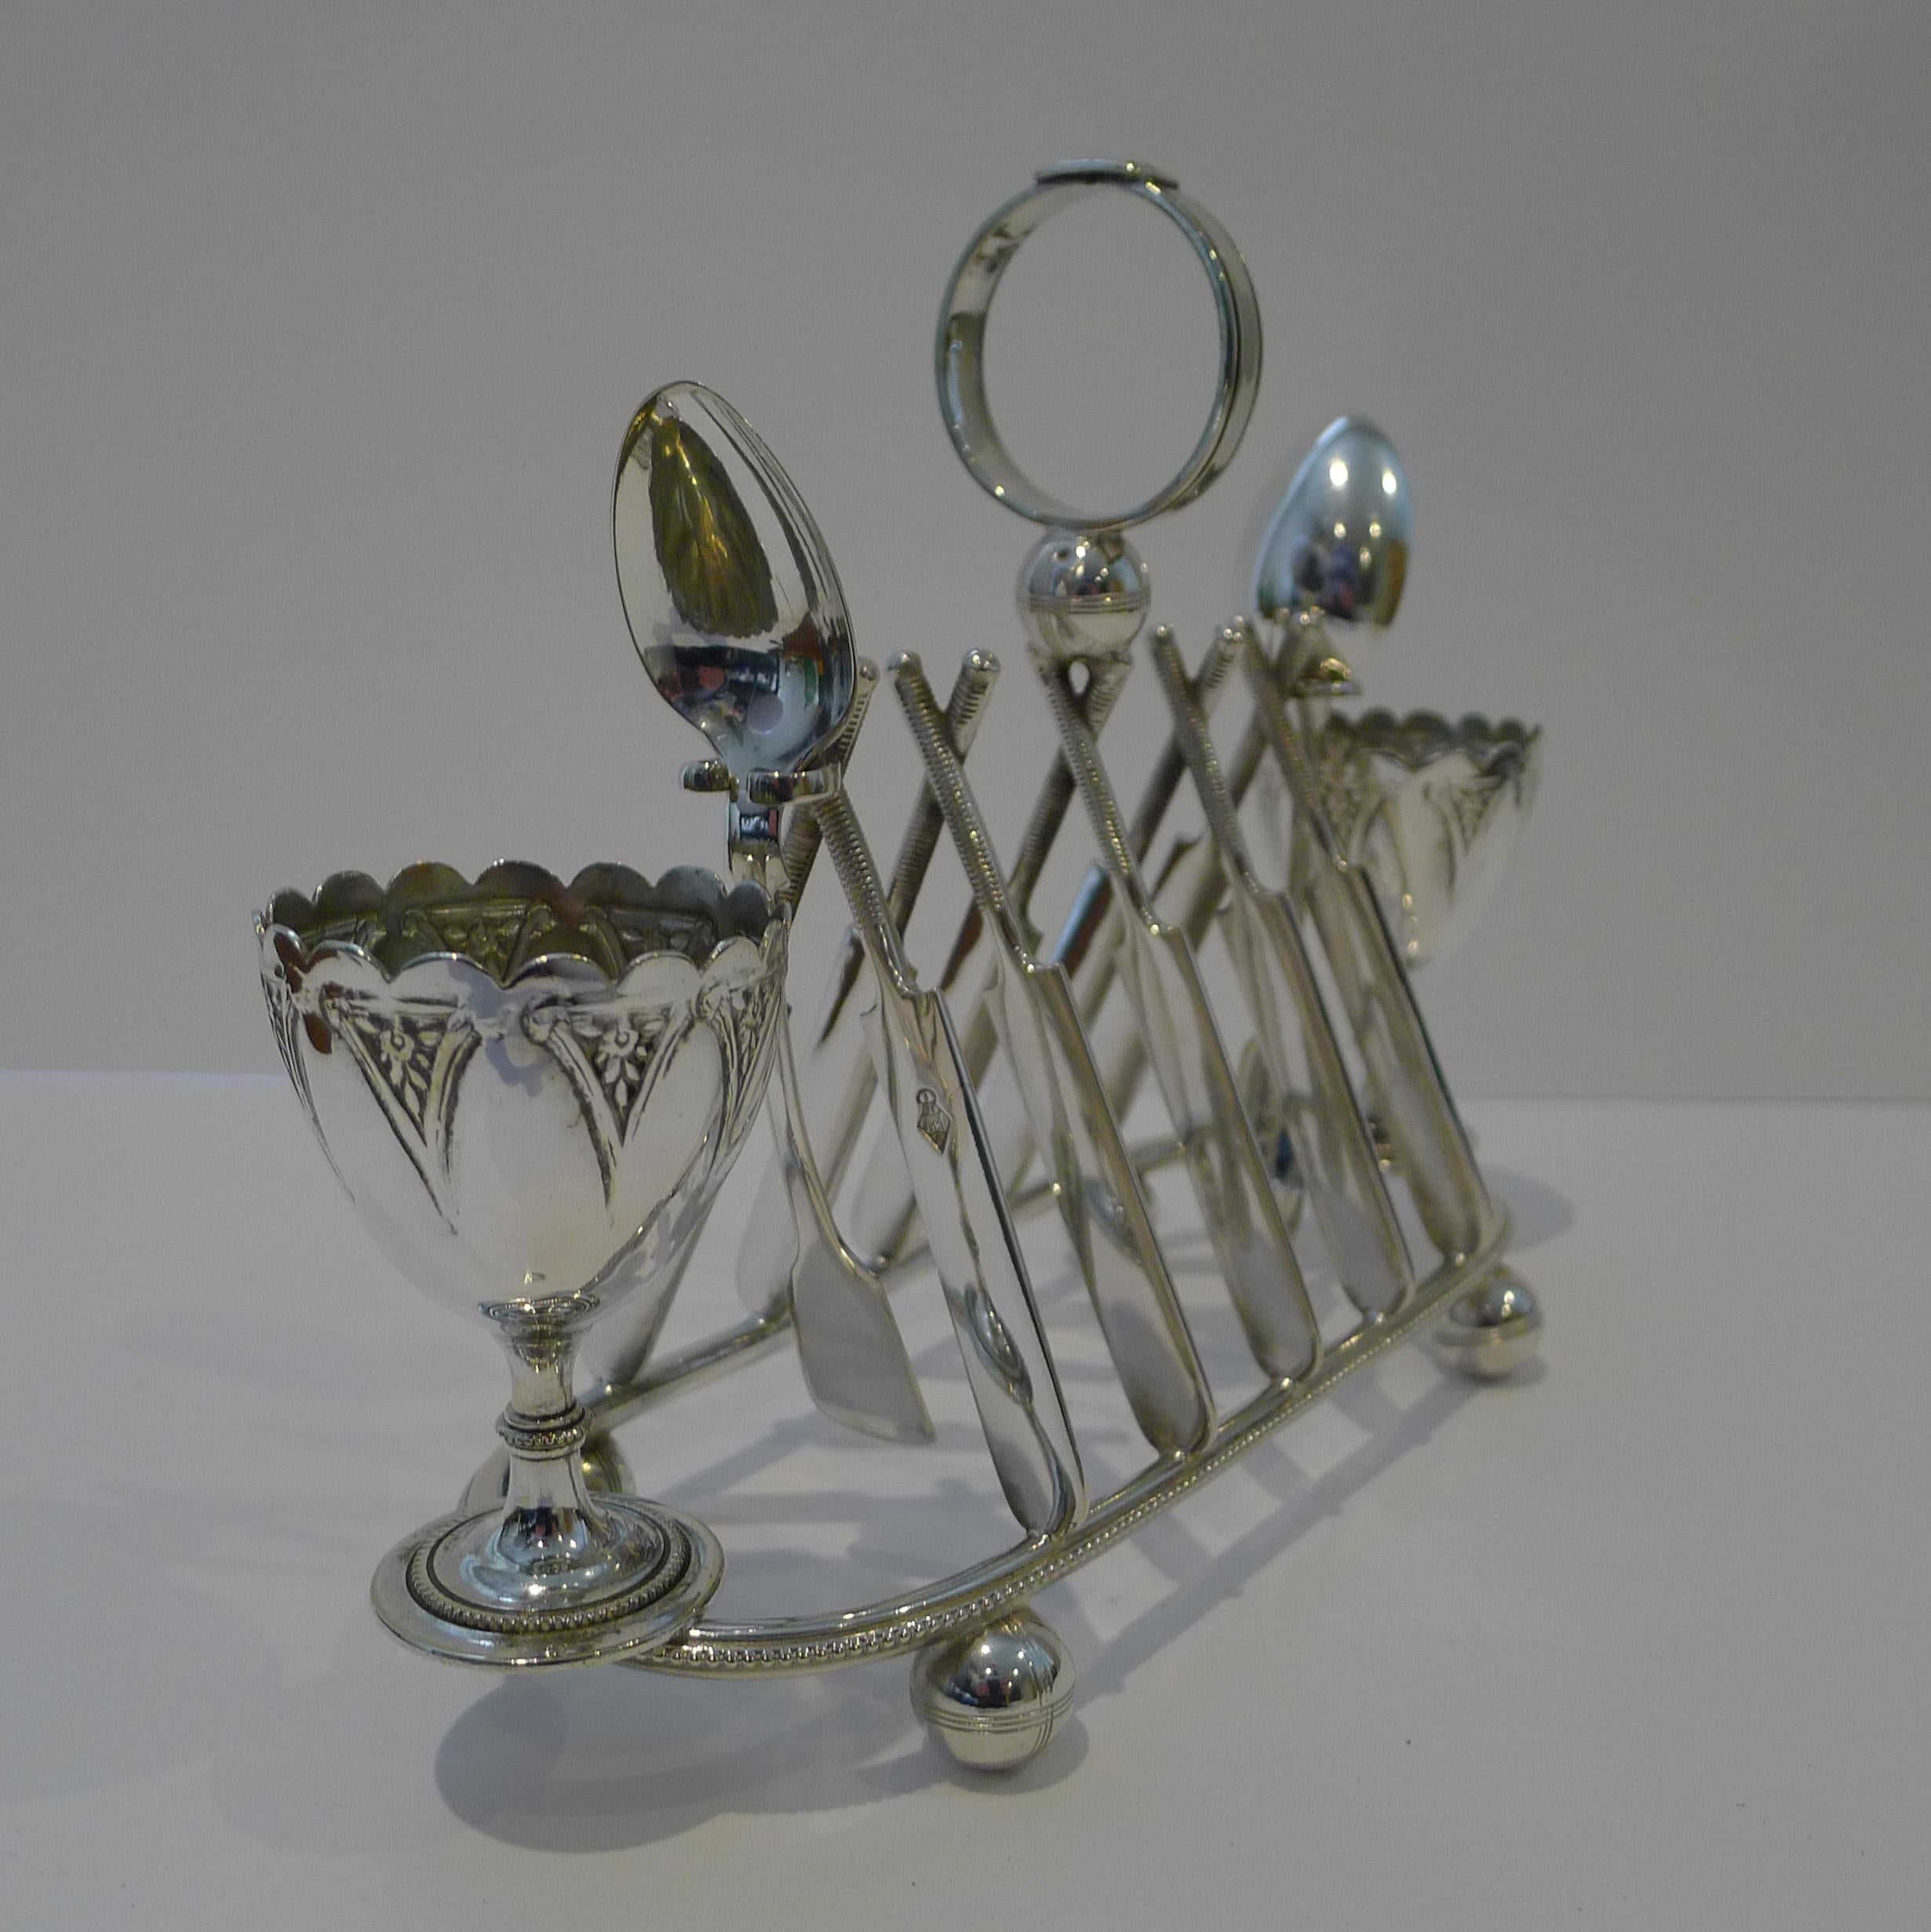 A rare find, this magnificent novelty toast rack / Egg Cruet of sporting interest, consists of the toast rack with an egg cup either end kept in place by an integral pin and two egg spoons; all in silver plate (EPNS).  The spoons are signed by the